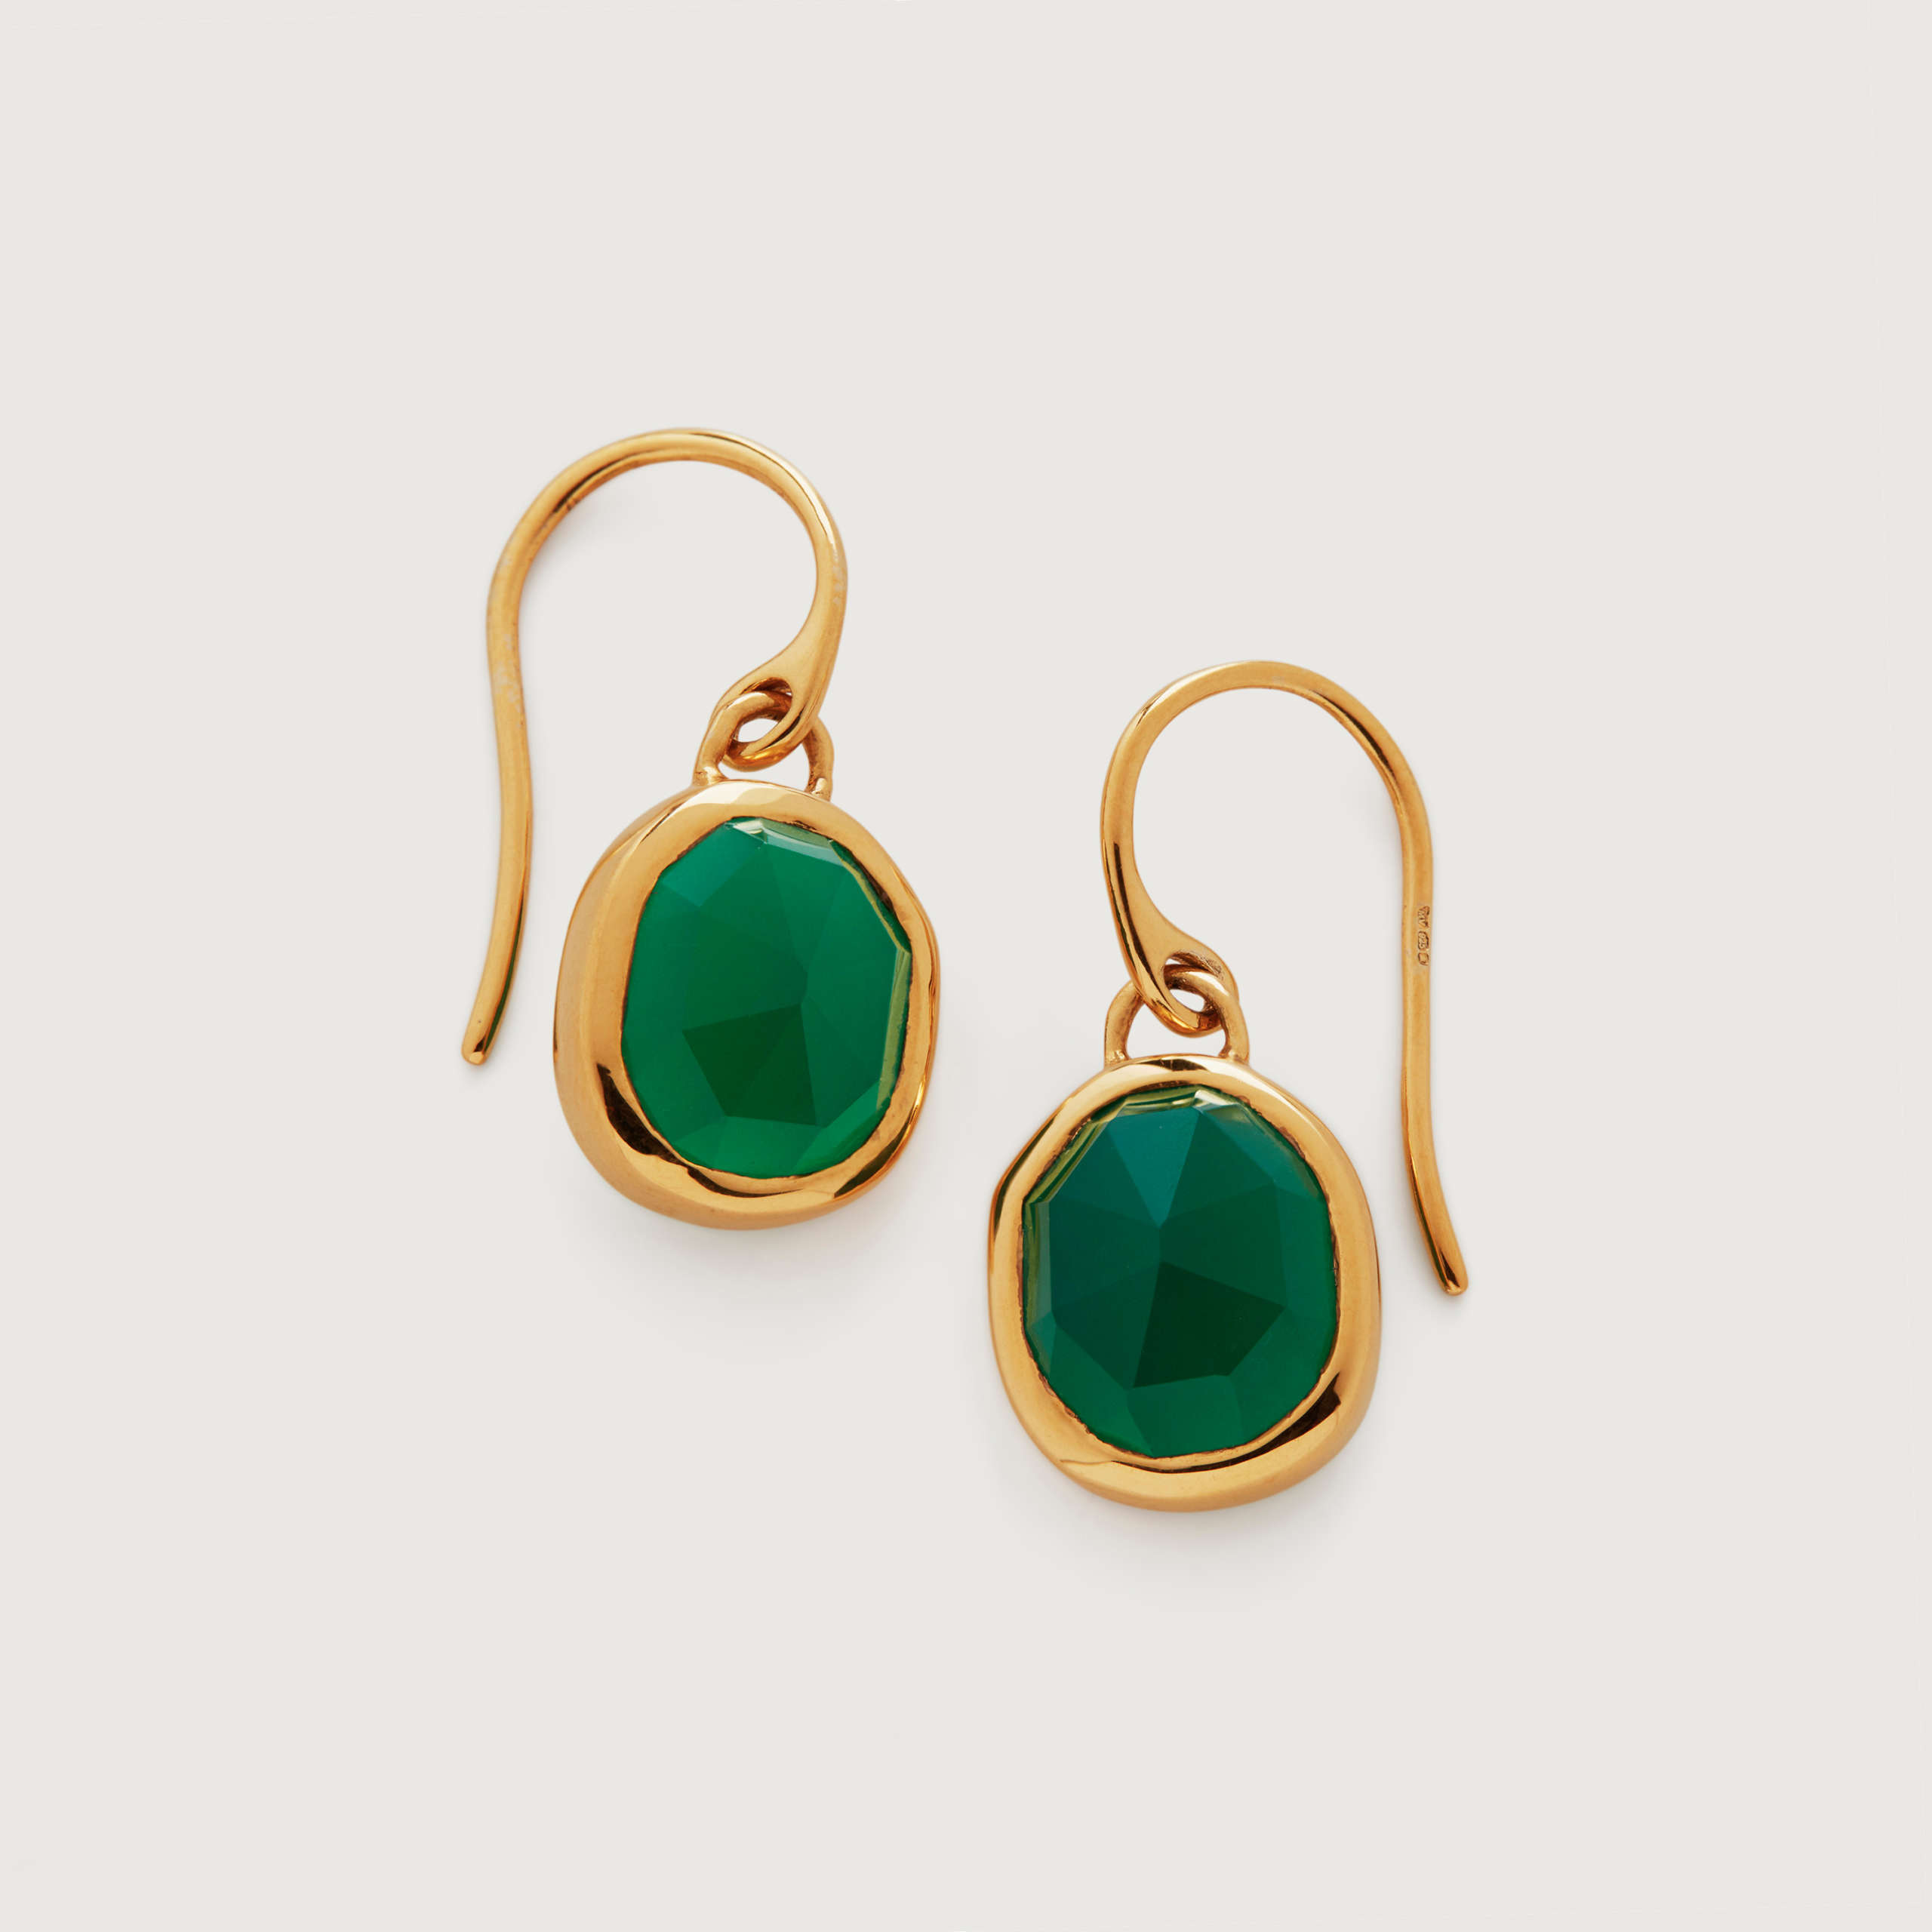 Monica Vinader Siren Wire Earrings Gold Vermeil and Green Onyx